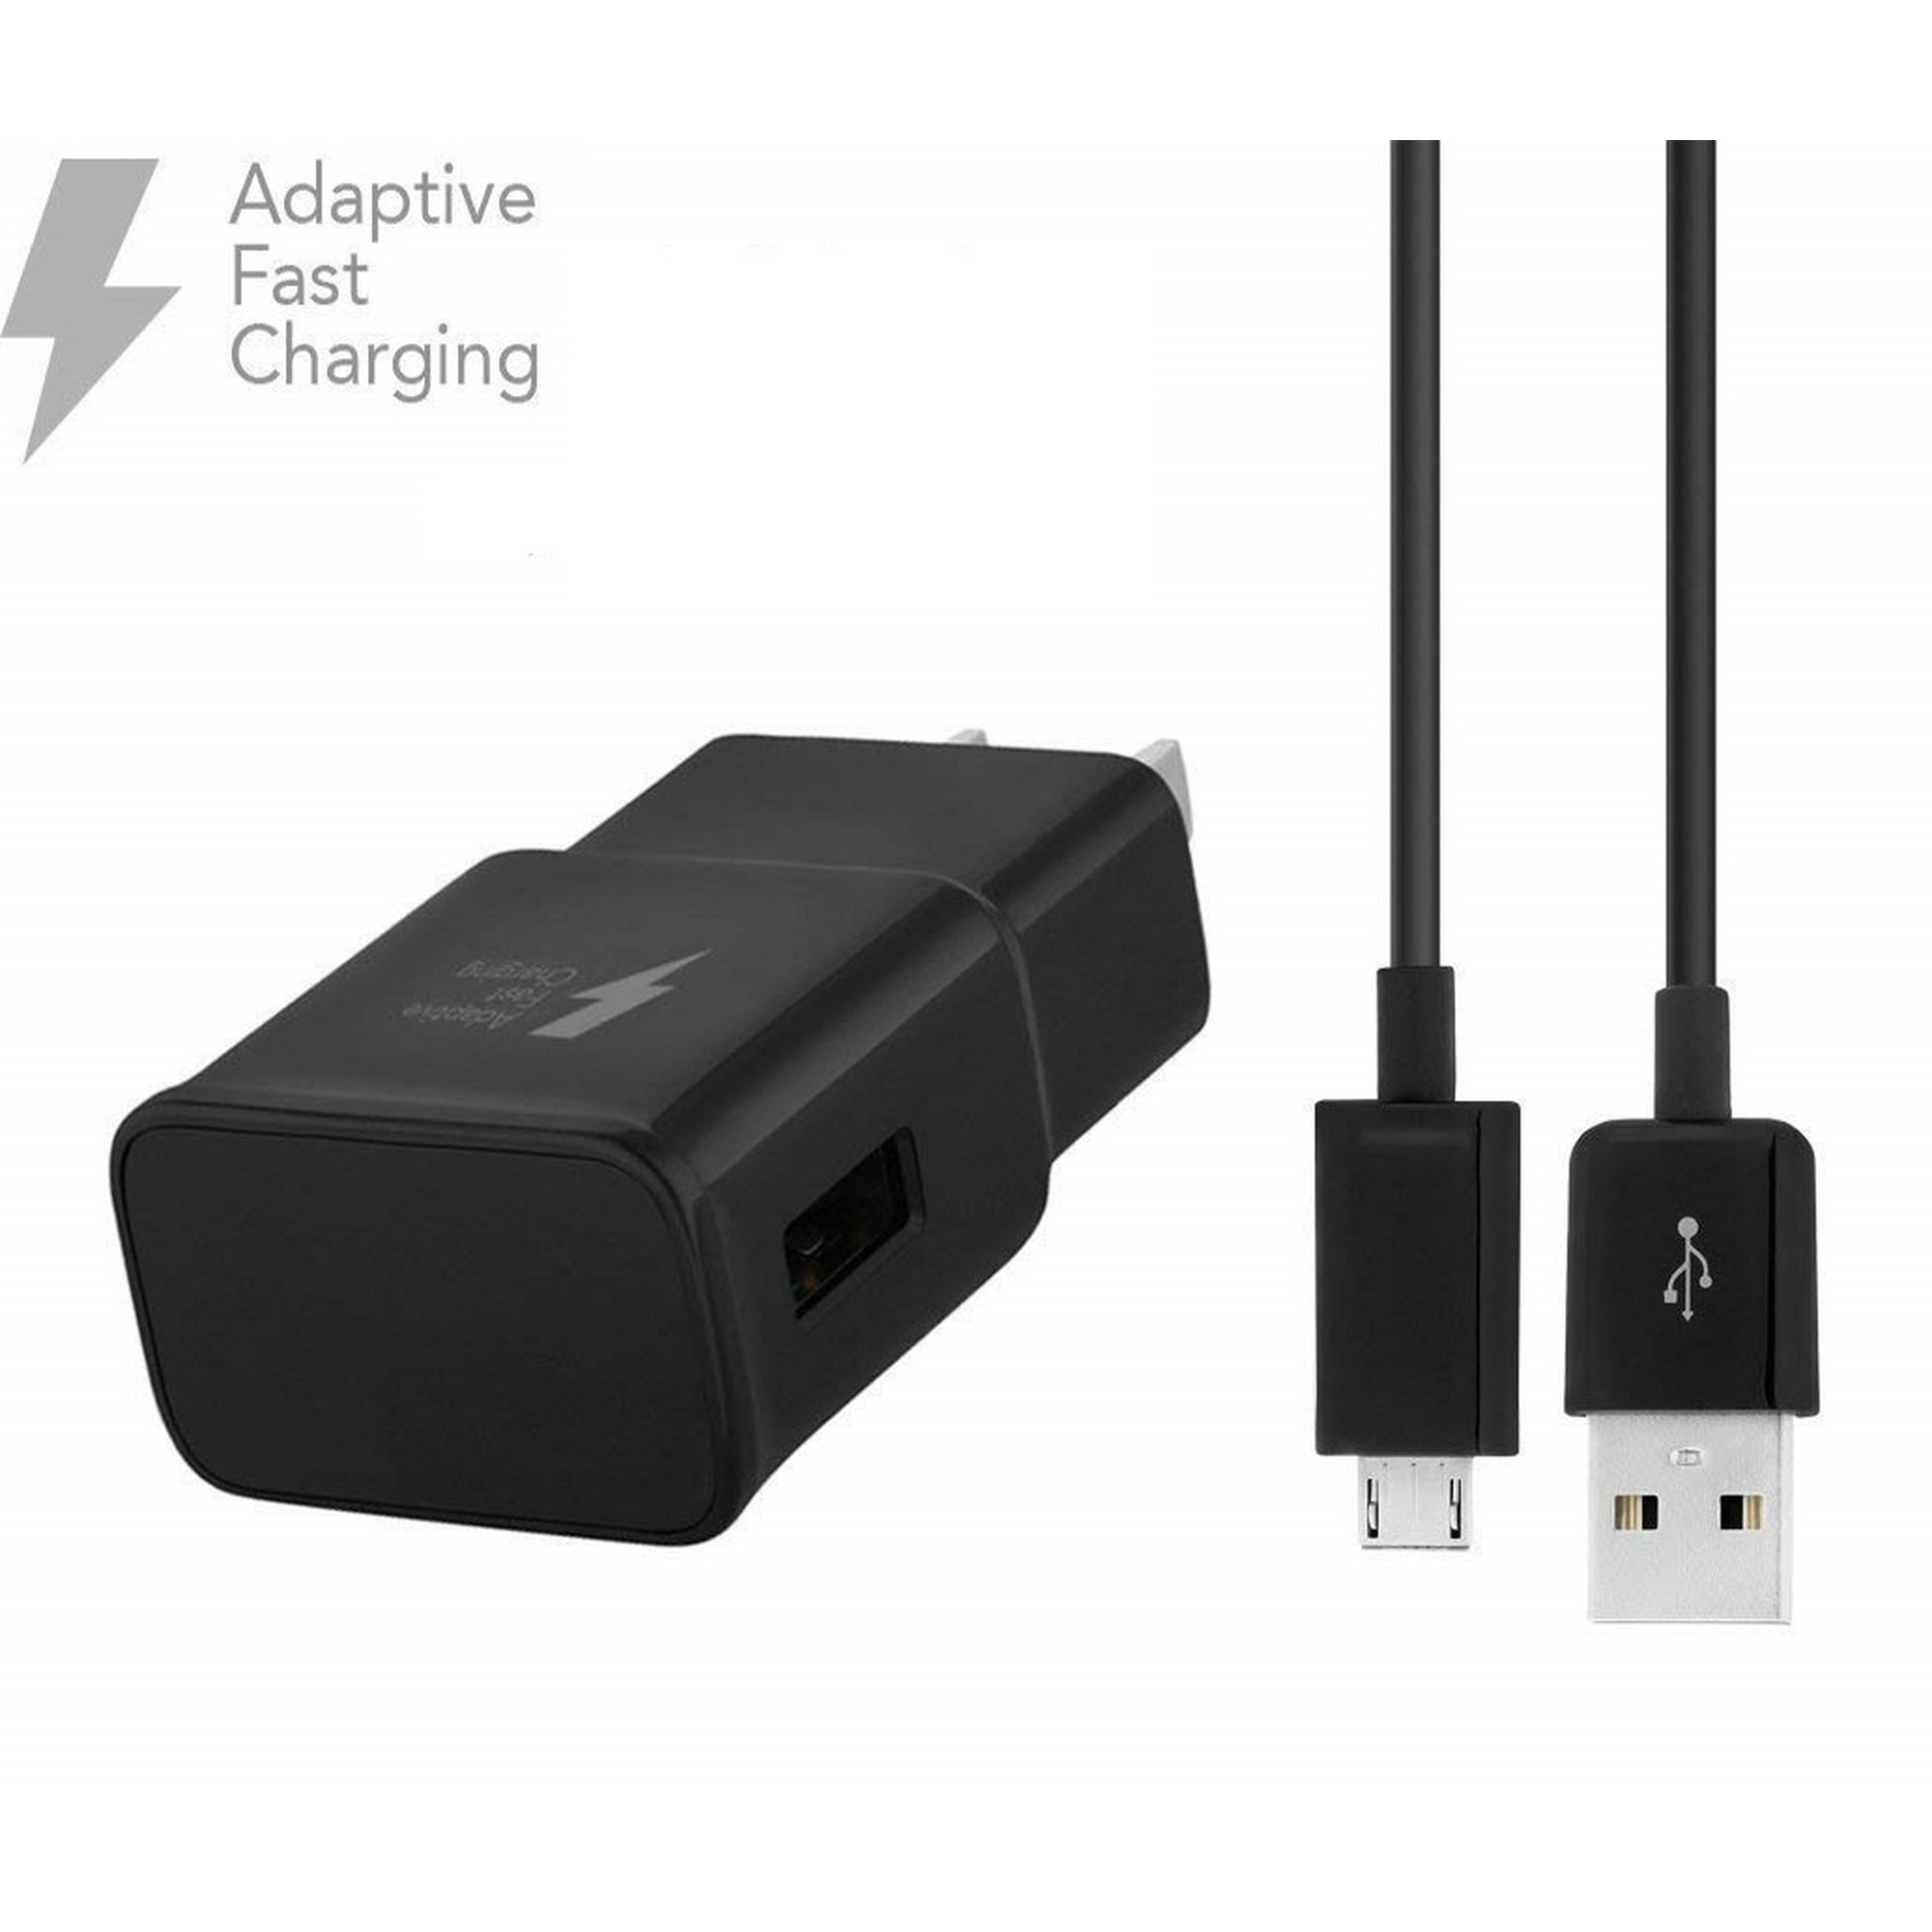 OEM Adaptive Fast Charger Compatible with Samsung Galaxy A5 (2015 old  model) Cell Phones [Wall Charger + 5 FT Micro USB Cable] - True Digital  Adaptive Fast Charging - Black | Walmart Canada